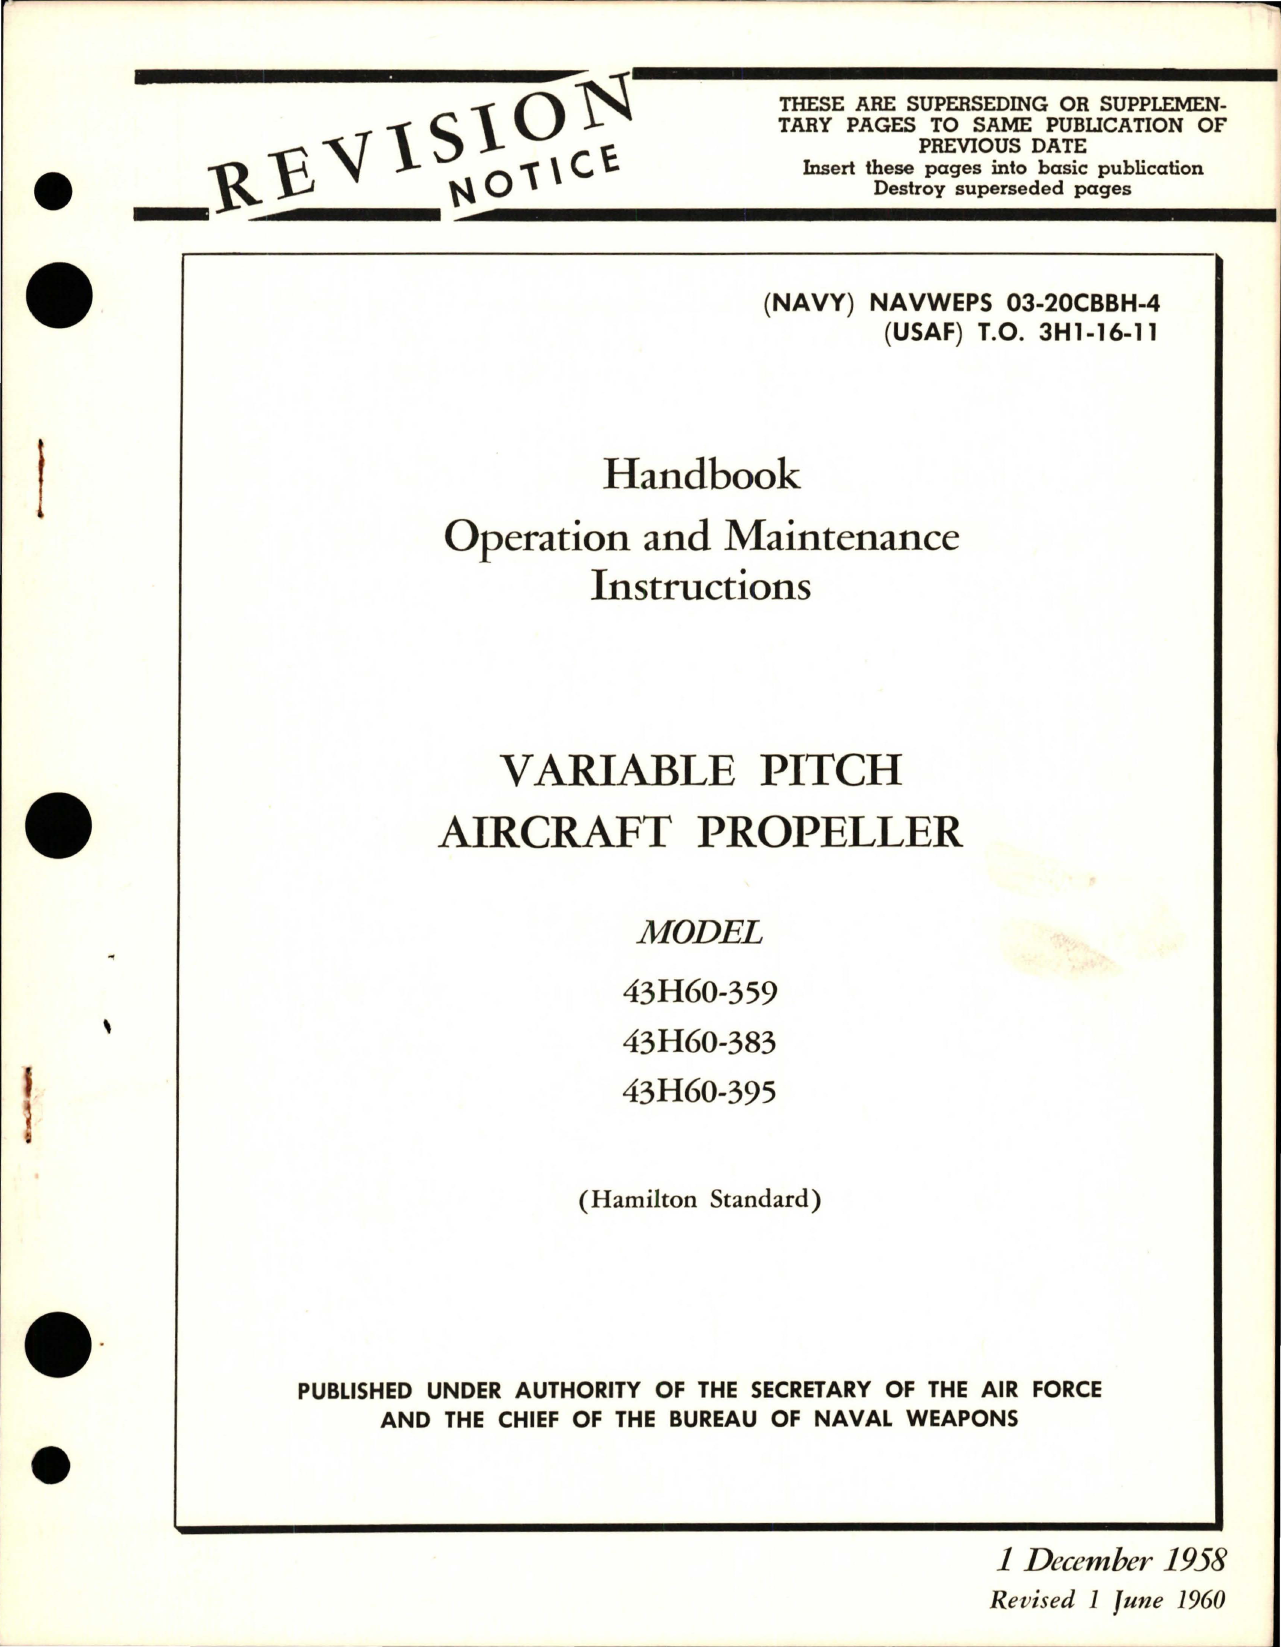 Sample page 1 from AirCorps Library document: Operation and Maintenance Instructions for Variable Pitch Propeller - Models 43H60-359, 43H60-383, and 43H60-395 